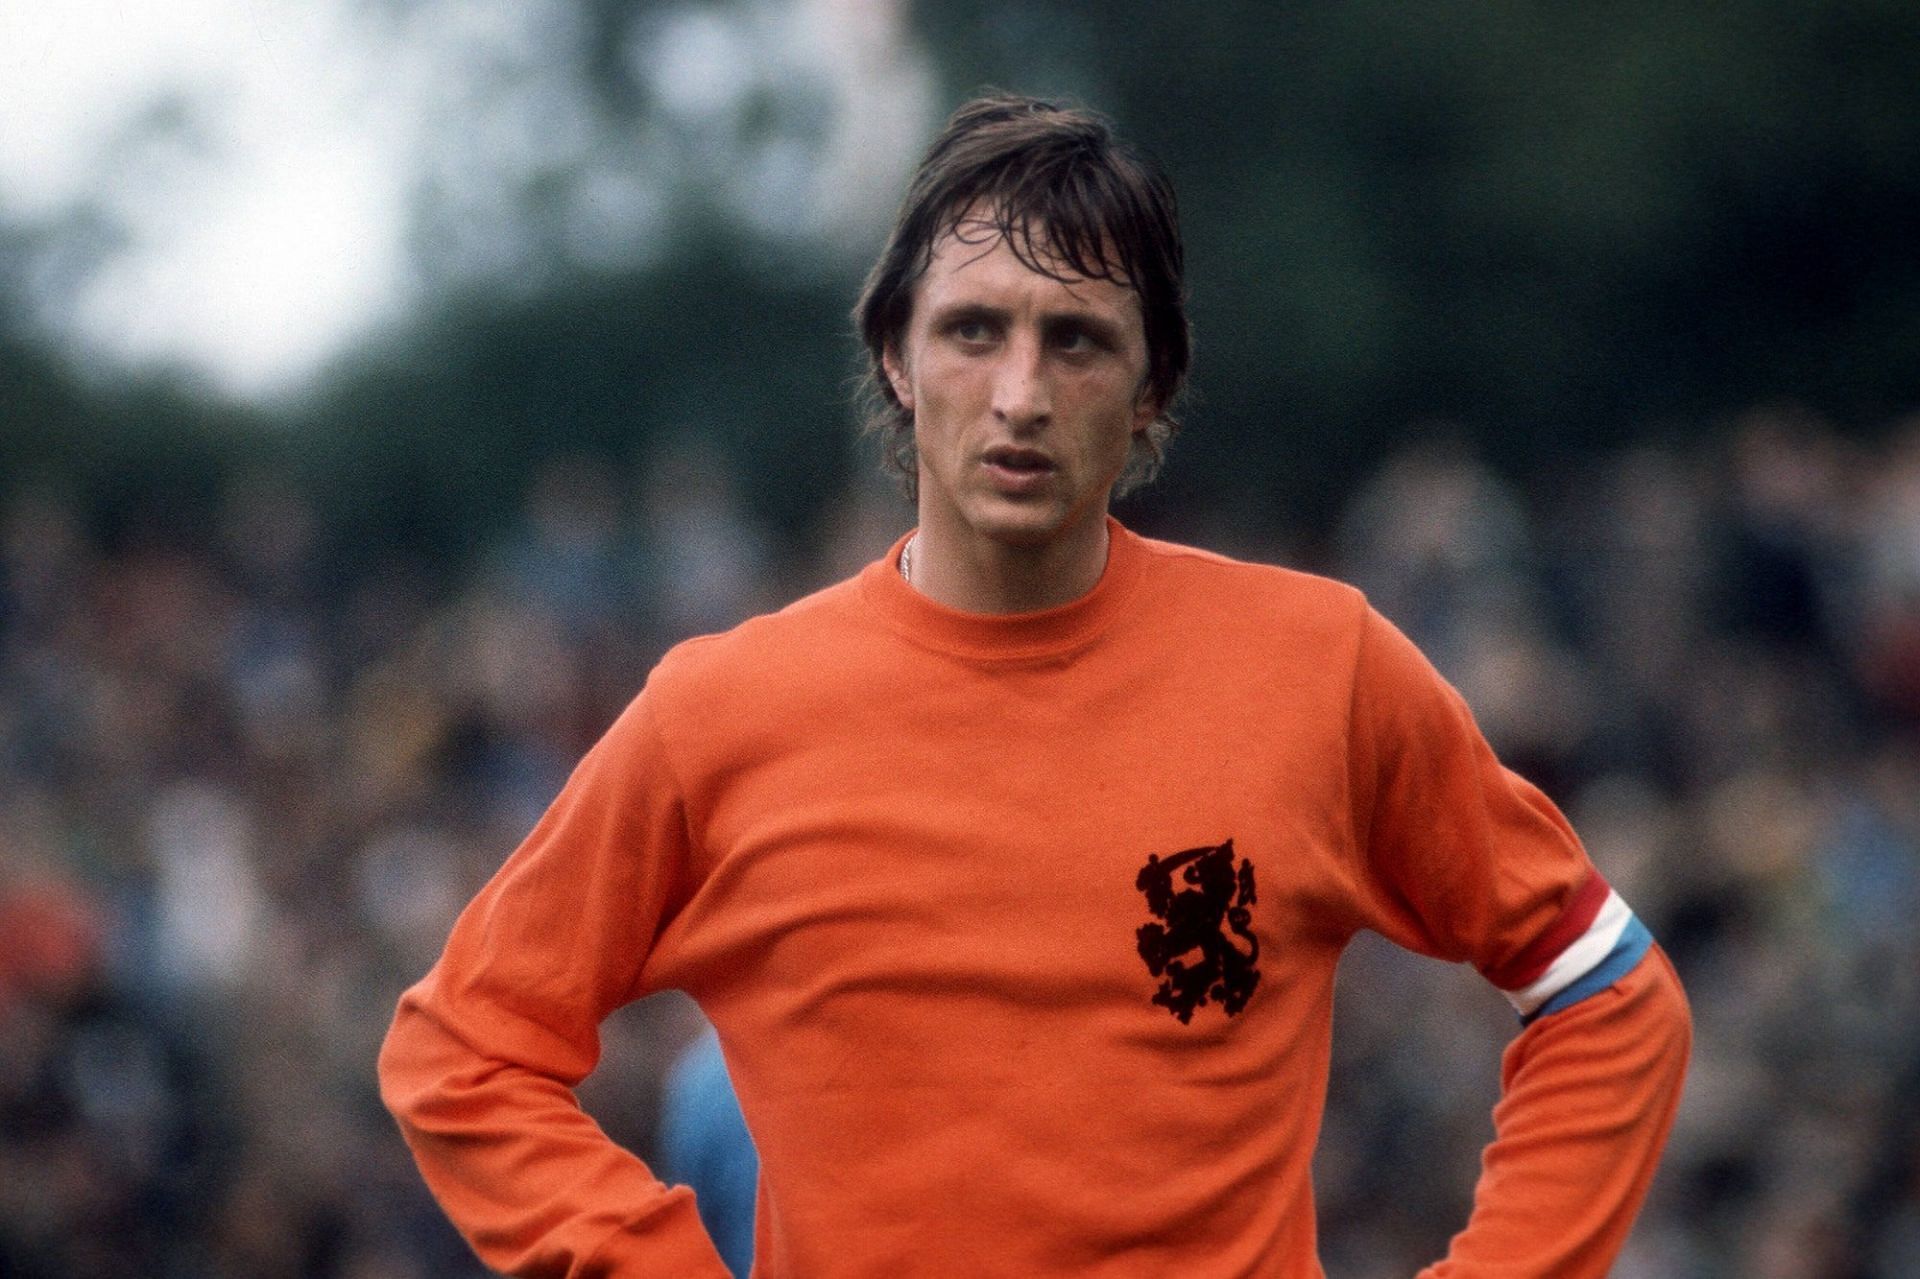 Johan Cruyff is widely regarded as one of the pioneers of football.